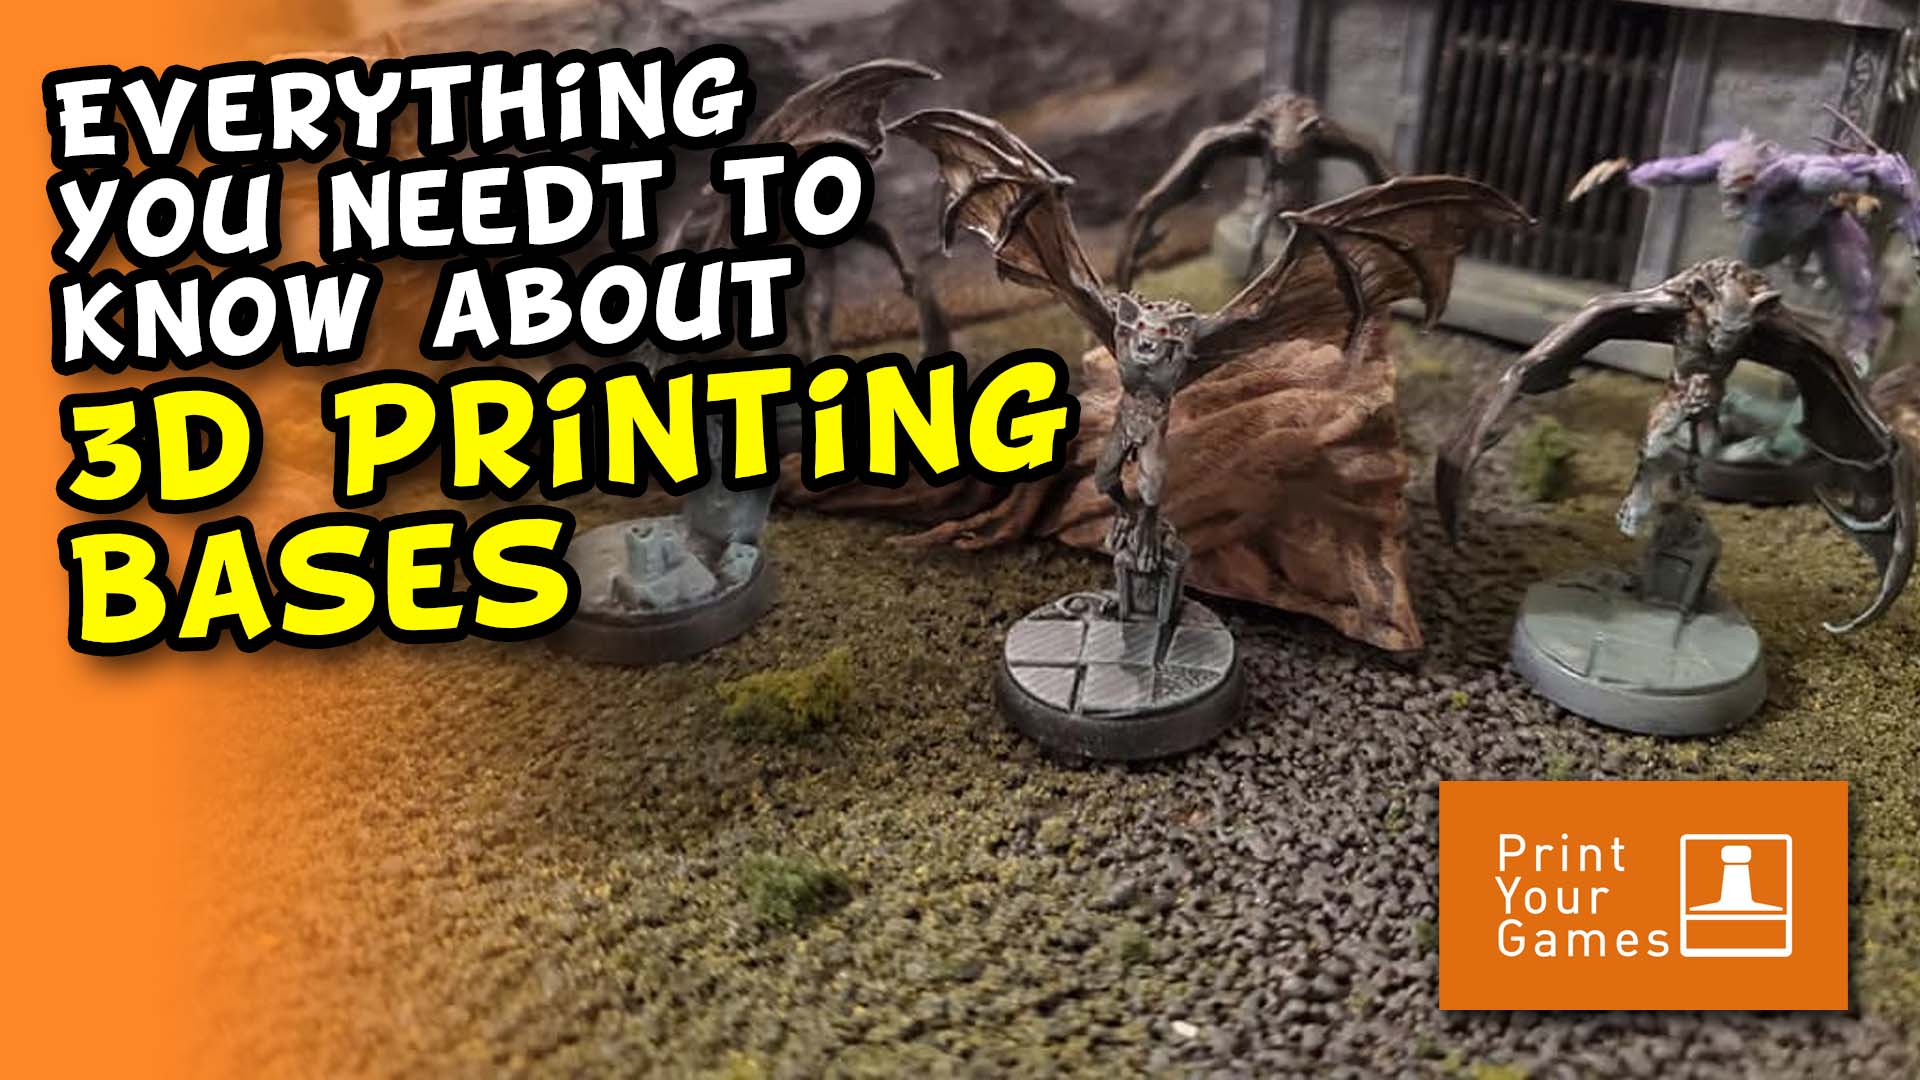 Everything you need to know about 3d Printing Bases